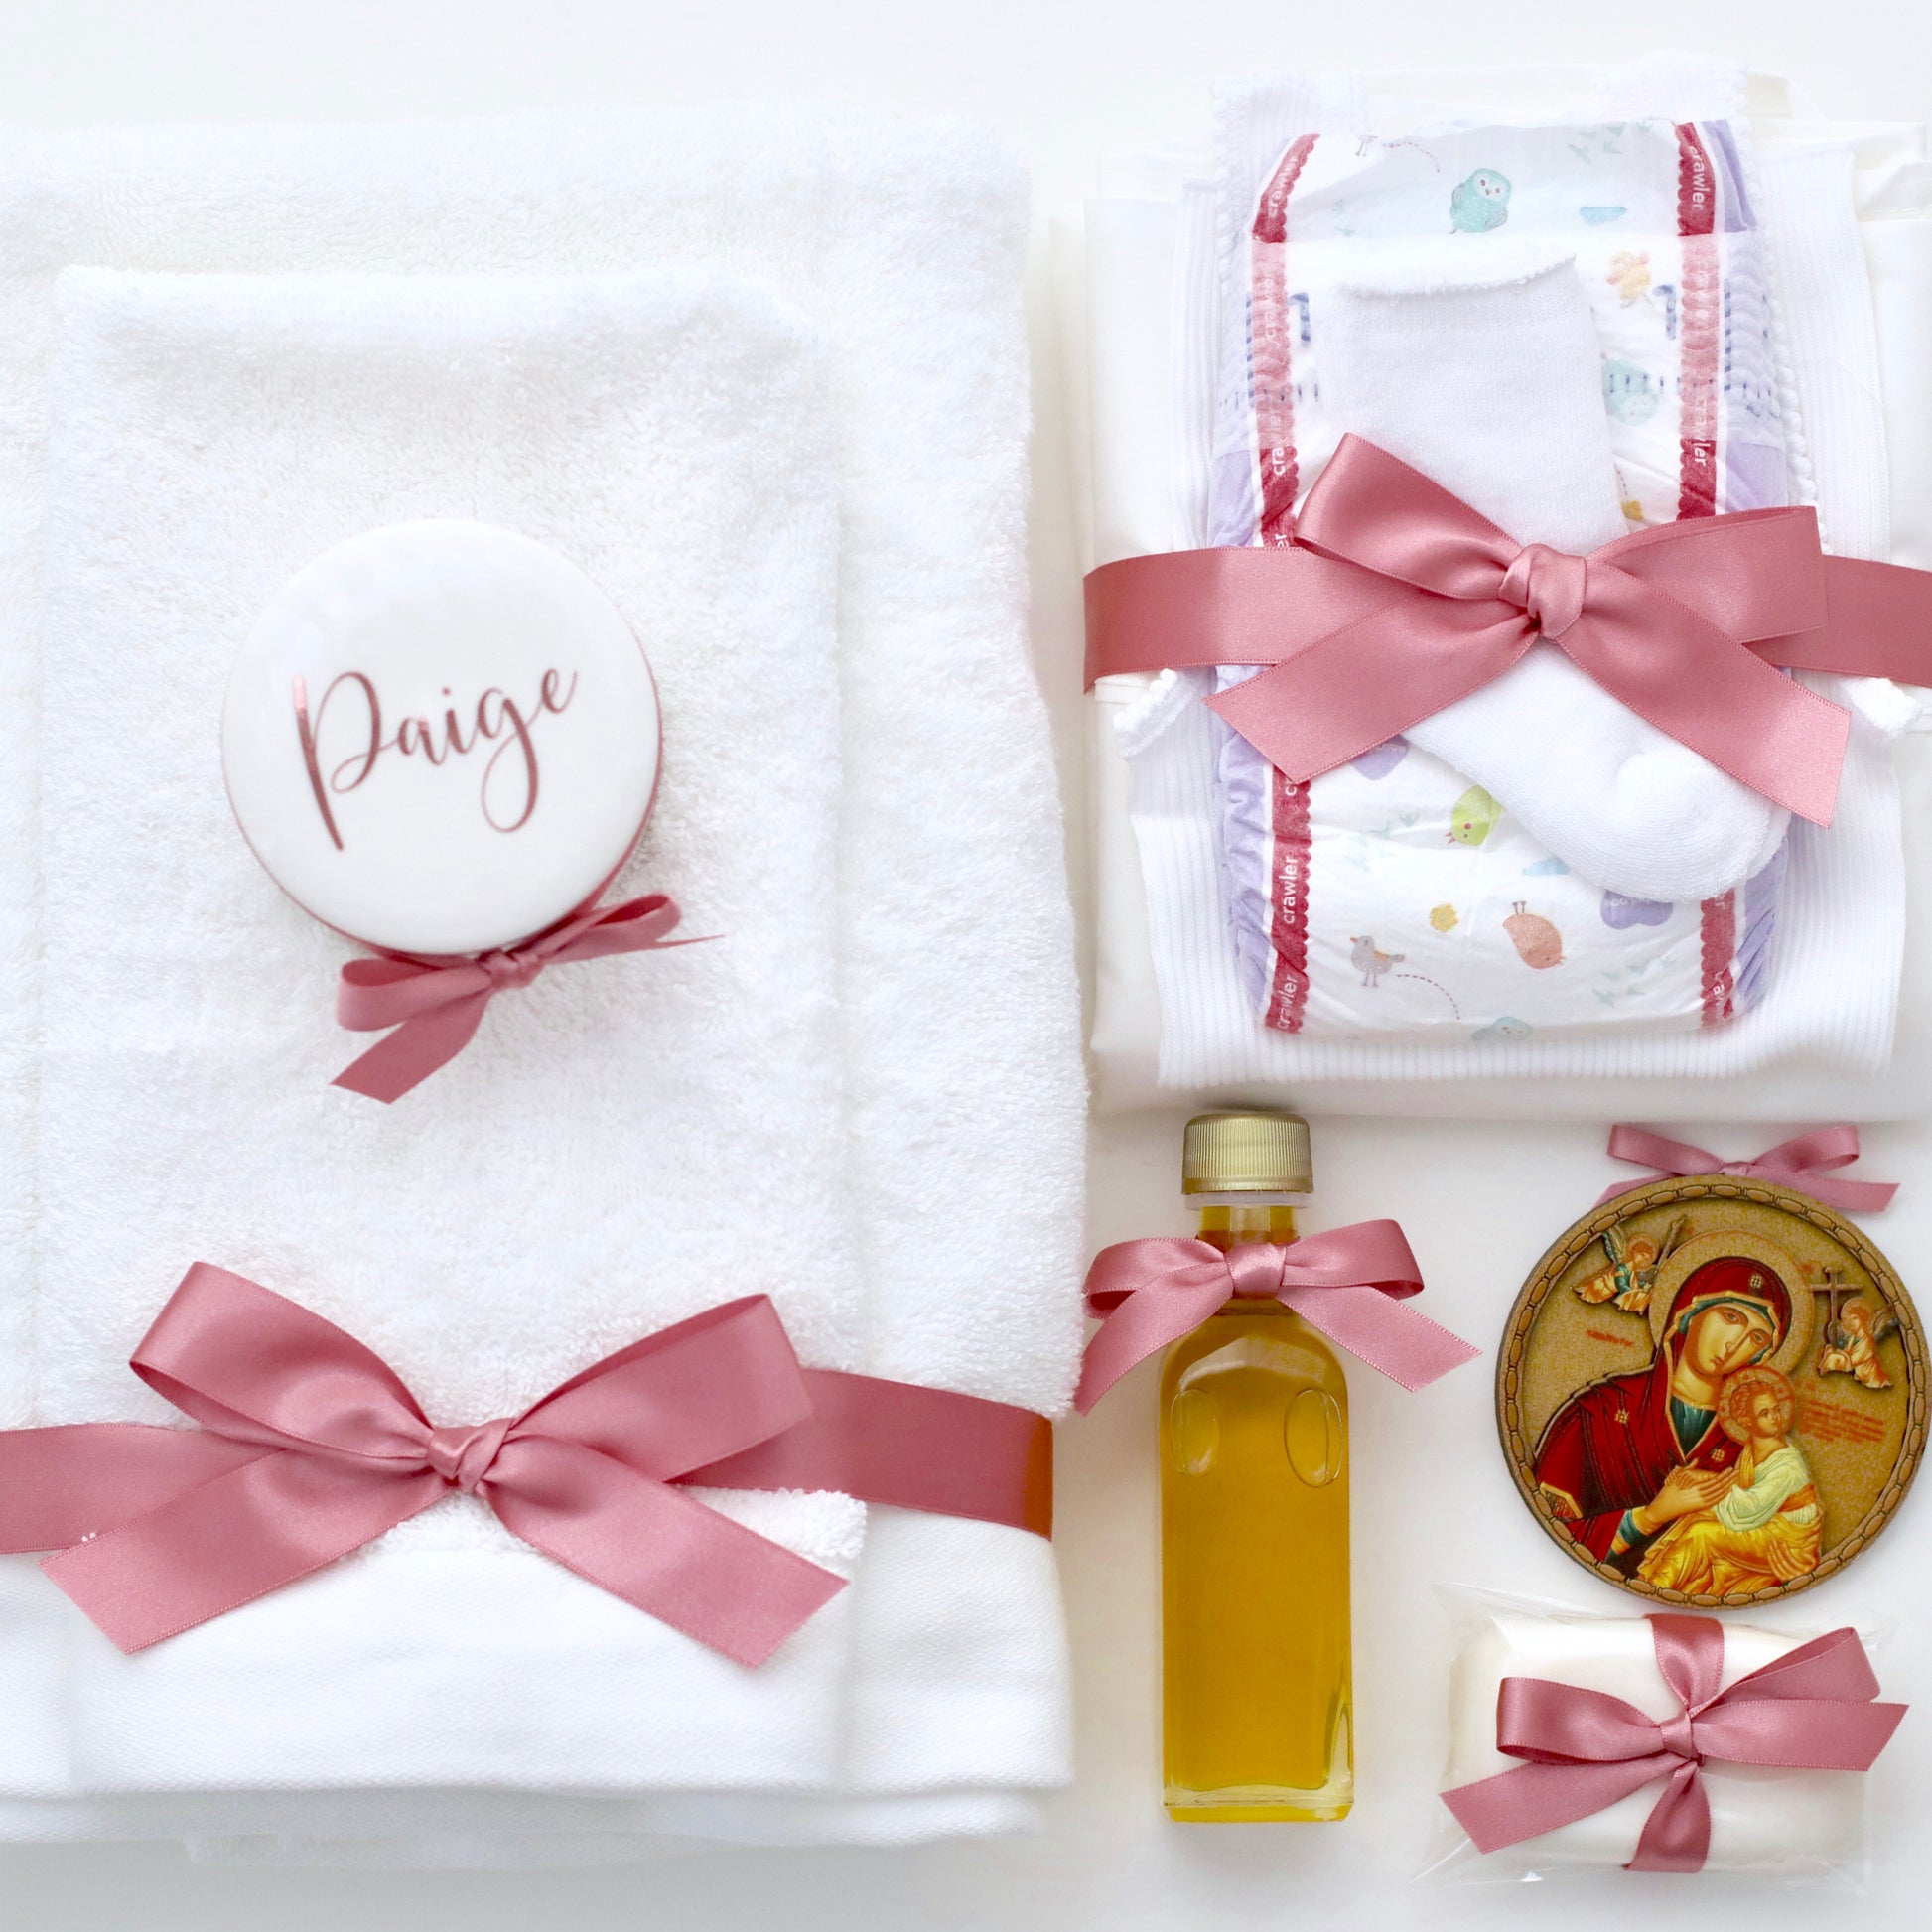 Classic Orthodox Package includes 1 x 1 x Your choice of White Extra Large Box, Clear Extra Large Acrylic Box, No Box. (Price varies depending on which option you choose.) 1 x Bath Towel 1 x Hand Towel 1 x Oil Sheet & Cap 1 x Singlet 1 x Oil 1 x Personalised Trinket Box 1 x Soap 1 x Socks 1 x Icon